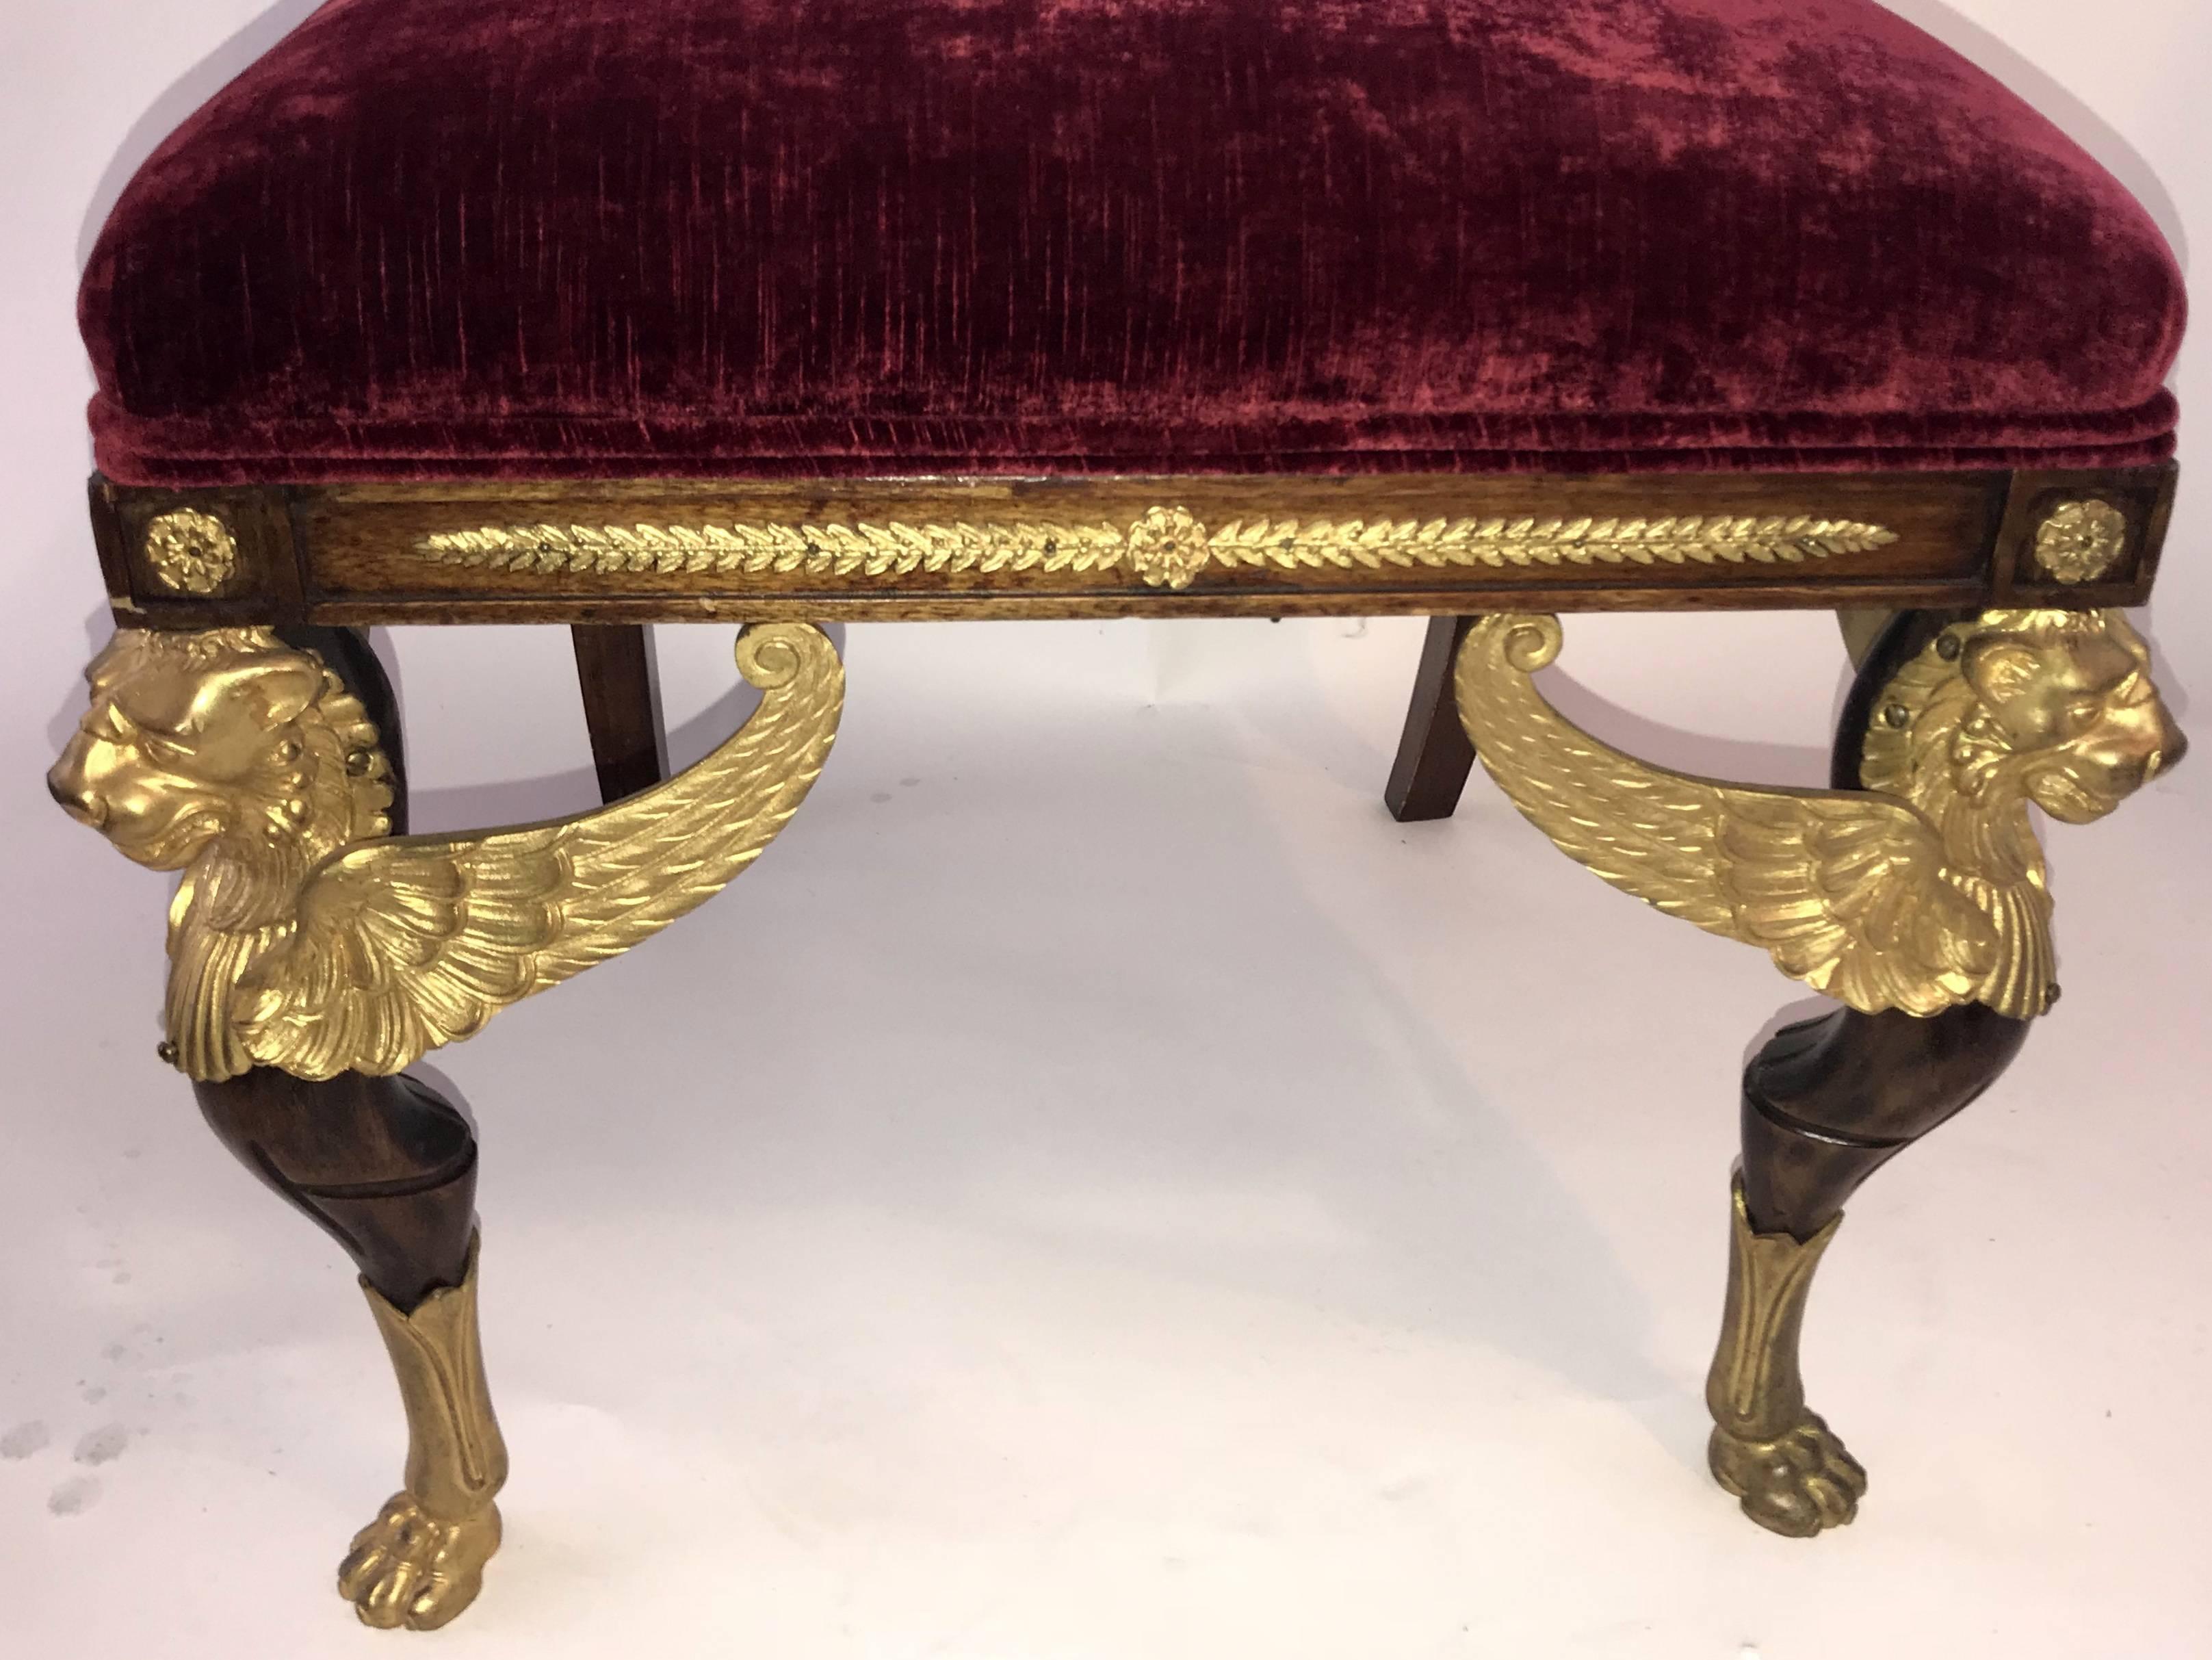 Pair of French Empire Winged Lion Gilt Bronze Ormolu-Mounted Side Chairs 1